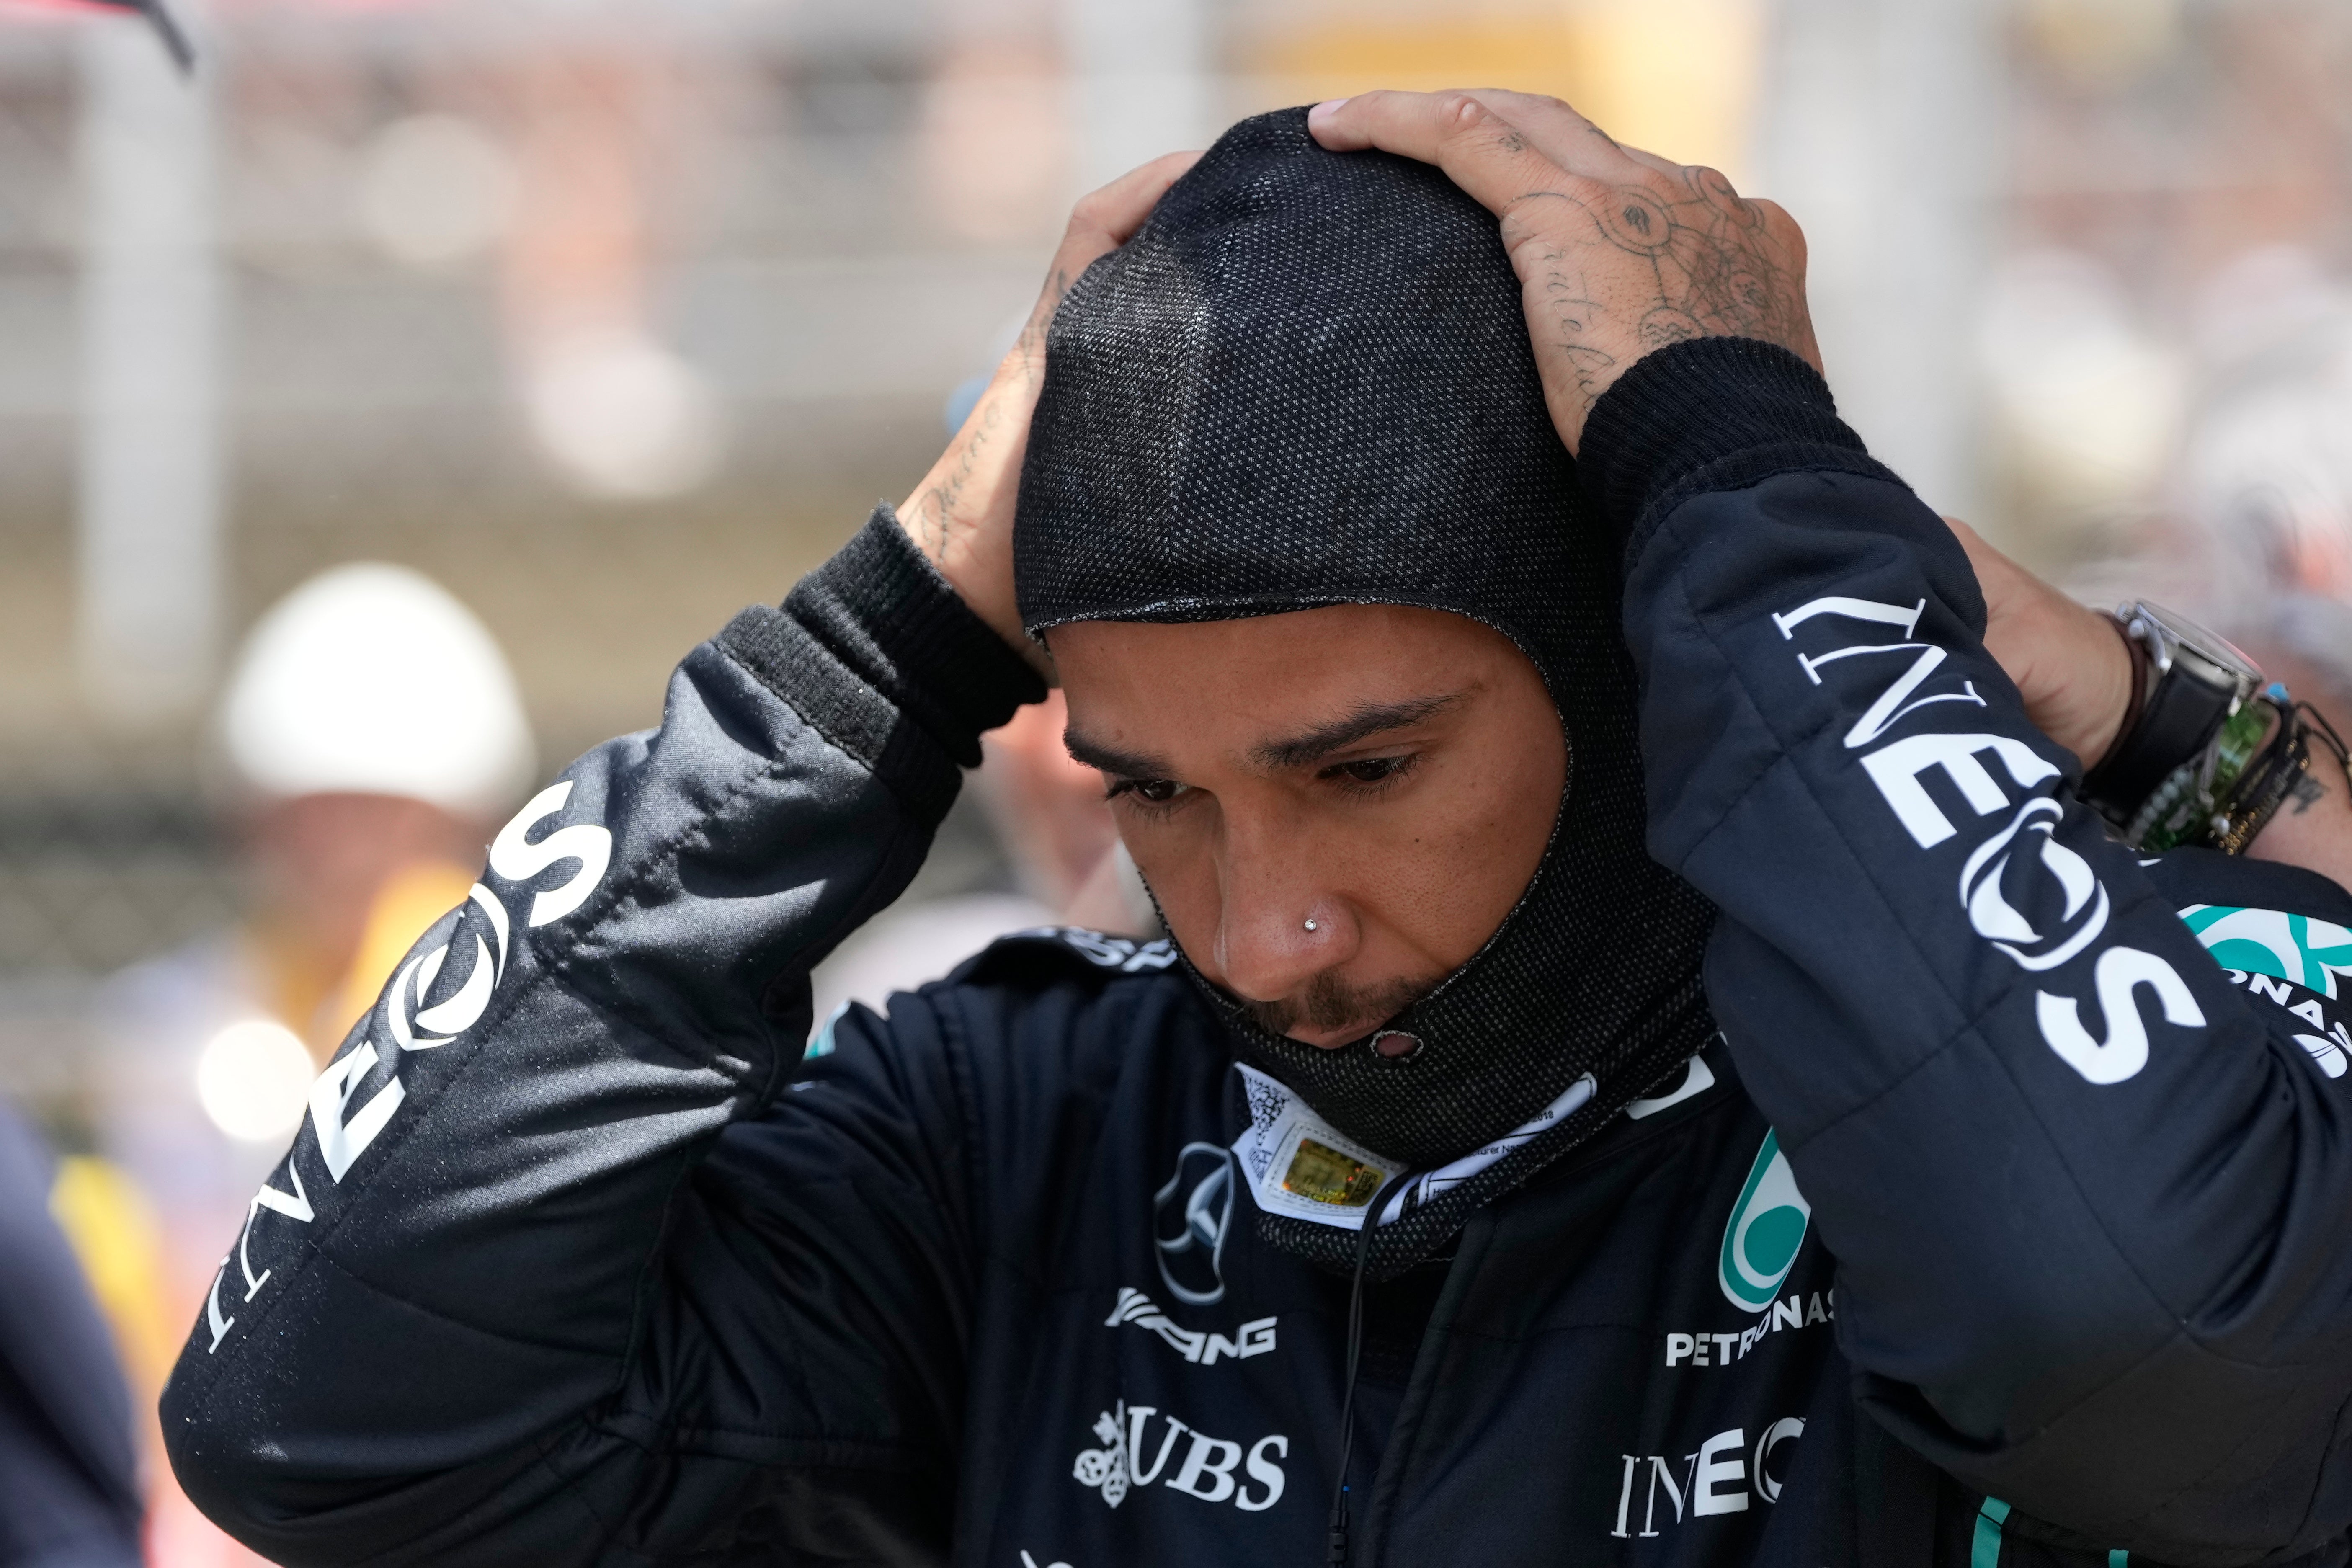 Lewis Hamilton finished fifth at the Spanish Grand Prix